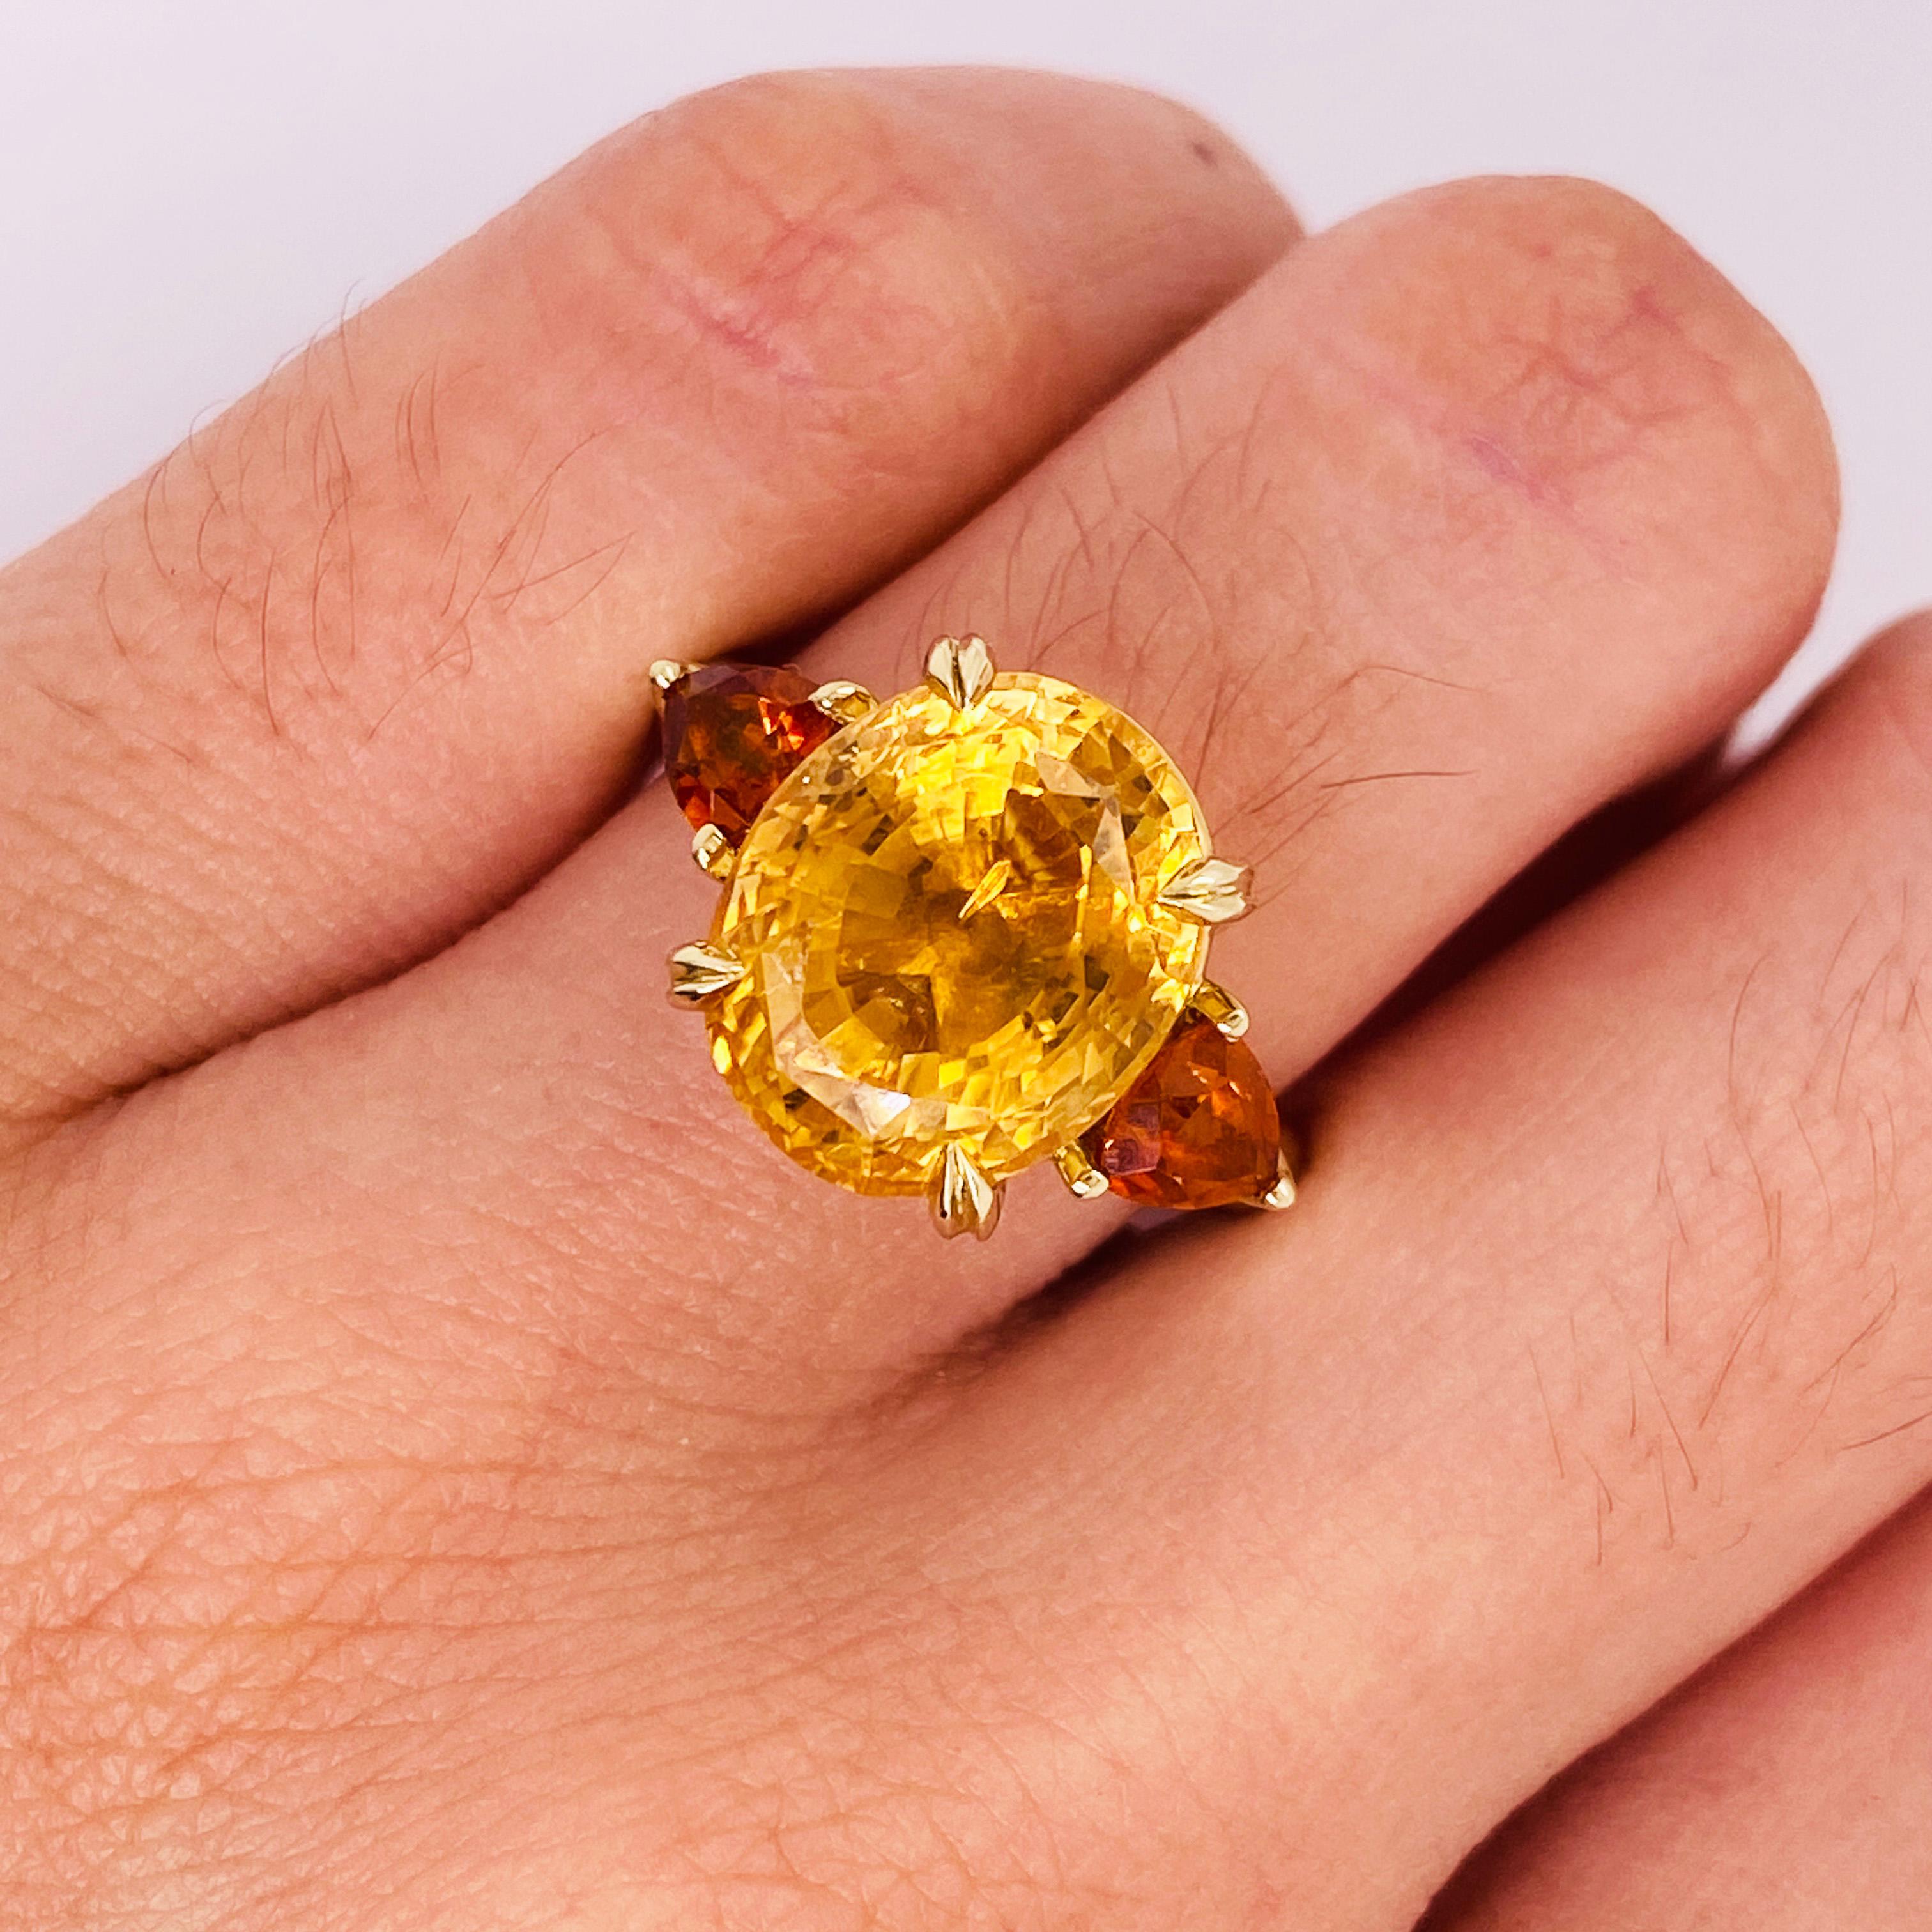 Oval Cut 7.12 Carats Citrines, Honey & Mandarin Oranges, Three-Stone Ring in 14K Gold LV For Sale